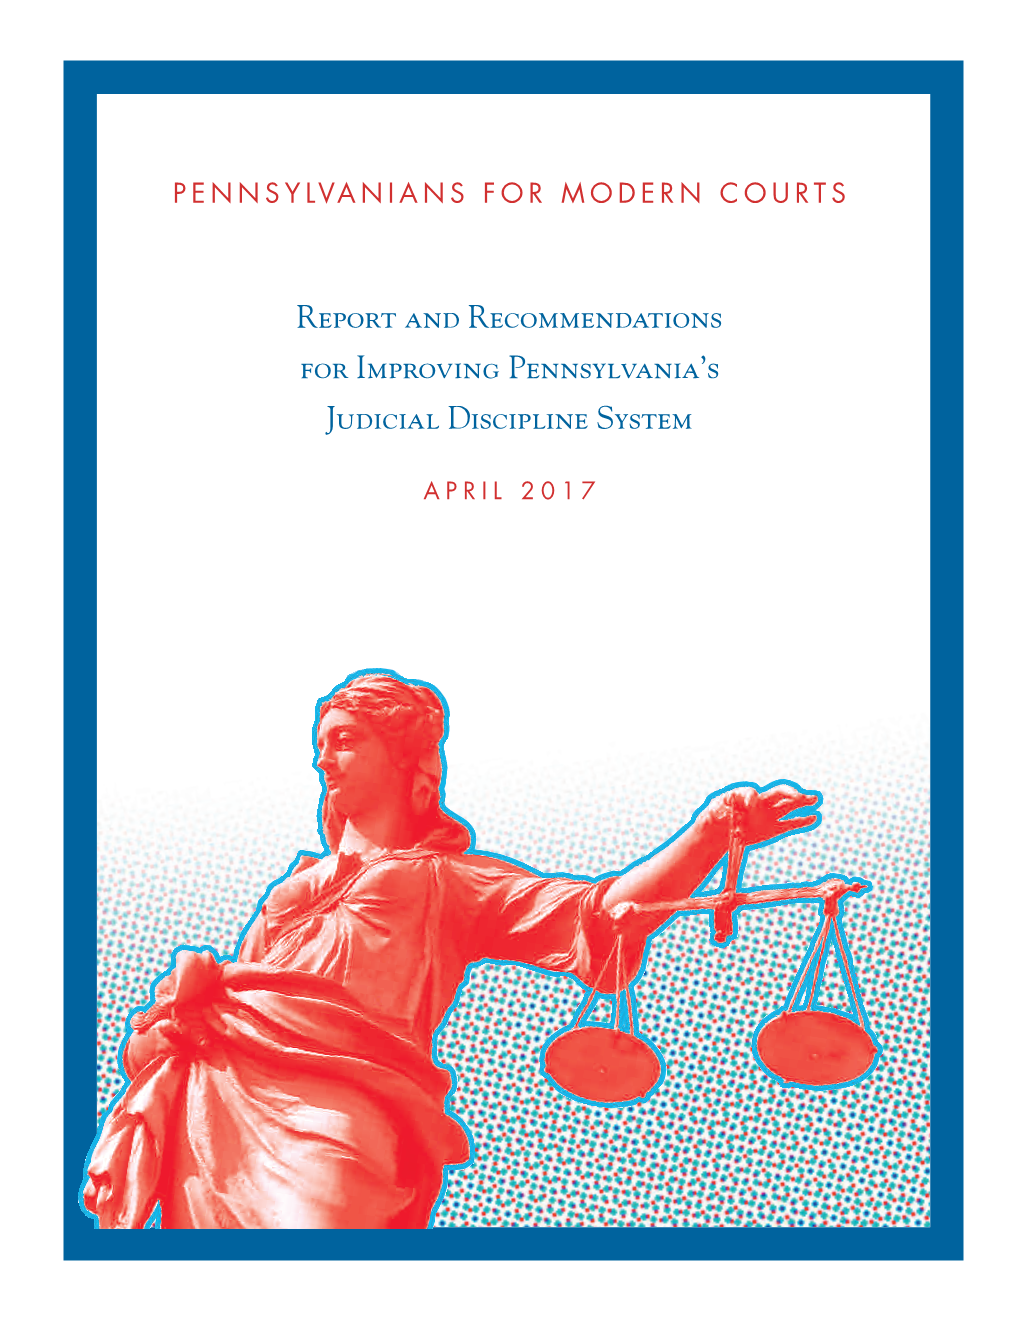 2017 Report and Recommendations for Improving Pennsylvania's Judicial Discipline System